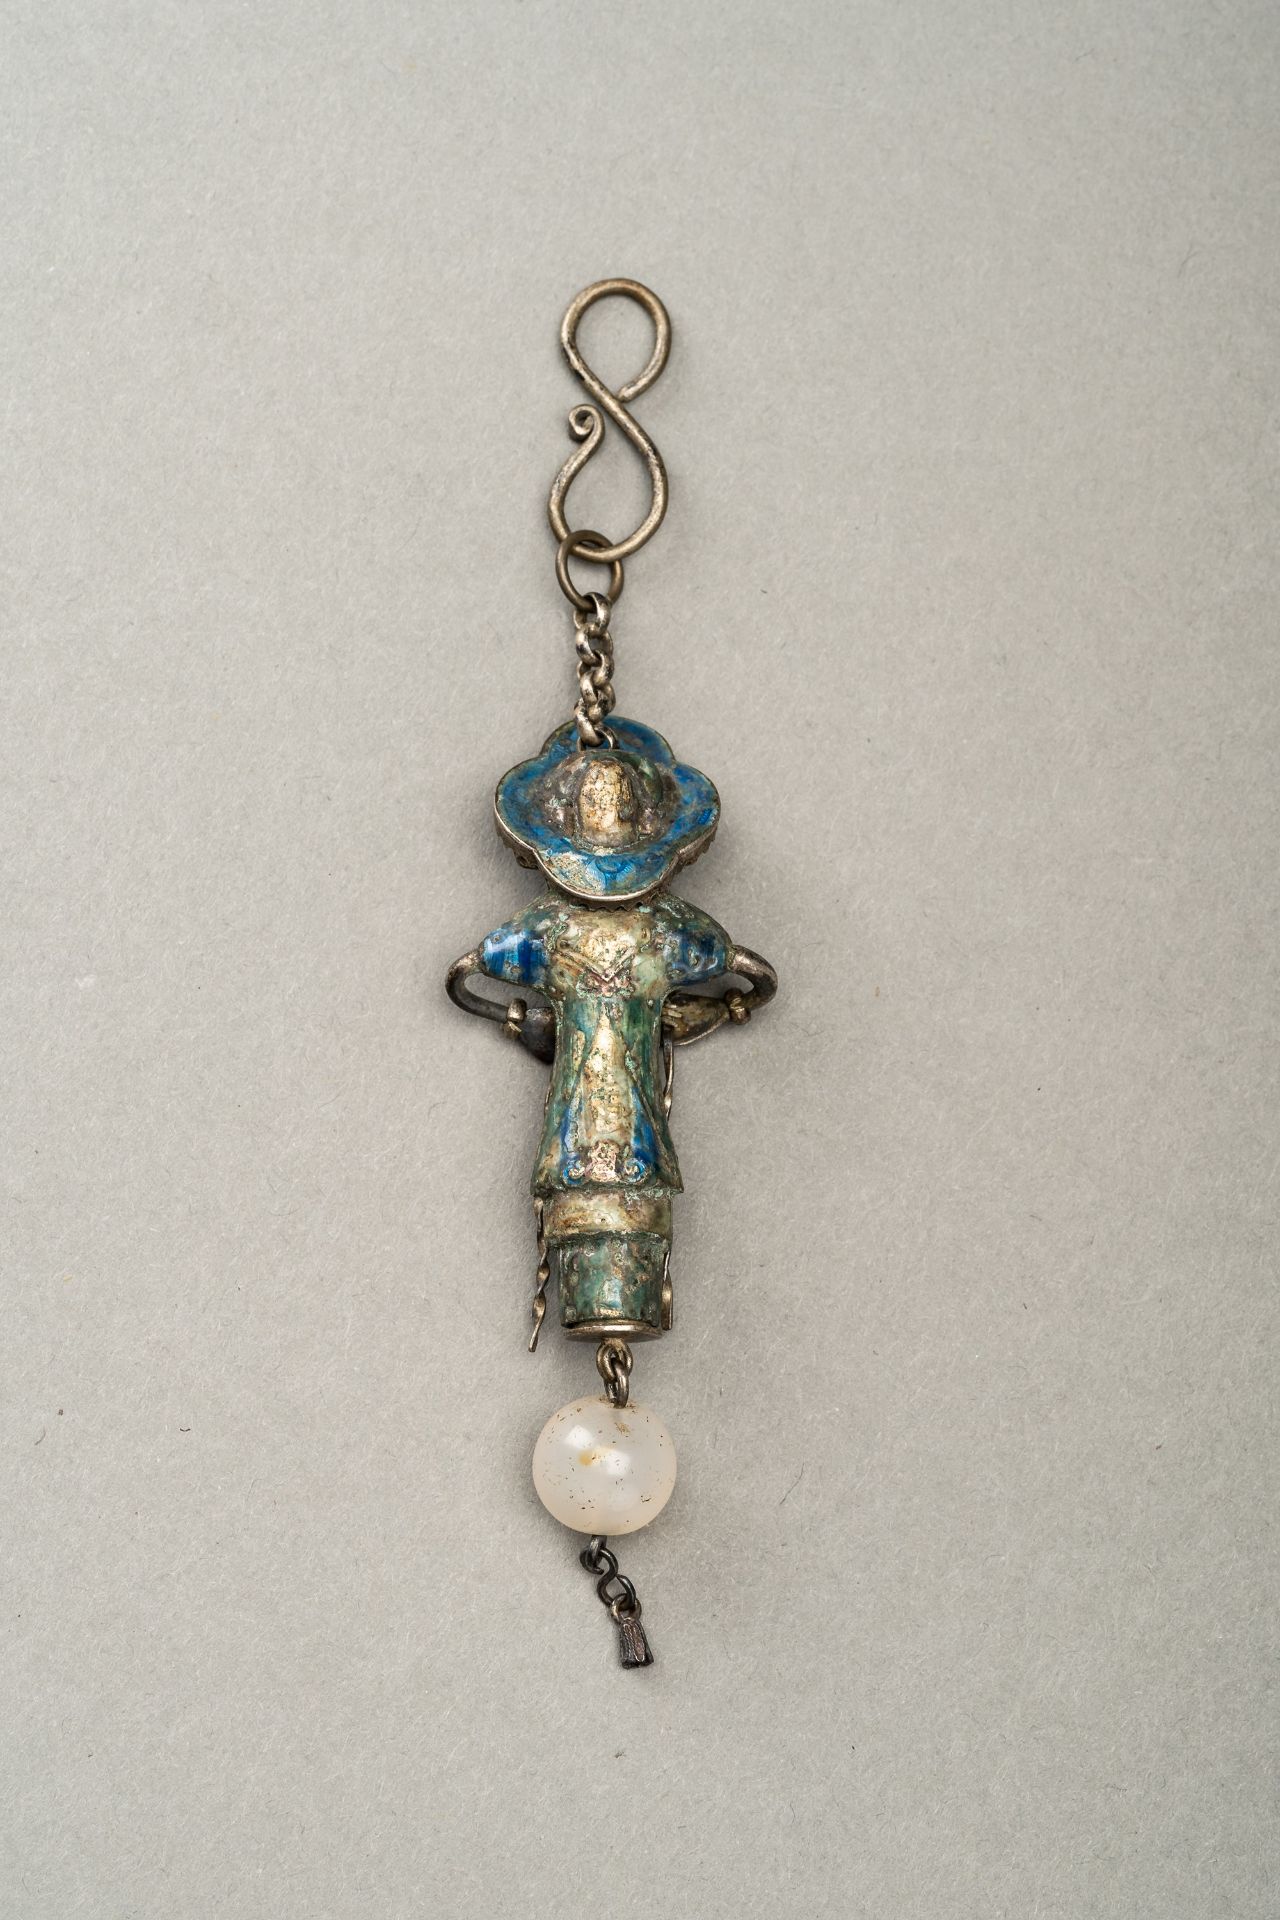 AN ENAMELED SILVER NEEDLE HOLDER, 17th CENTURY - Image 9 of 10